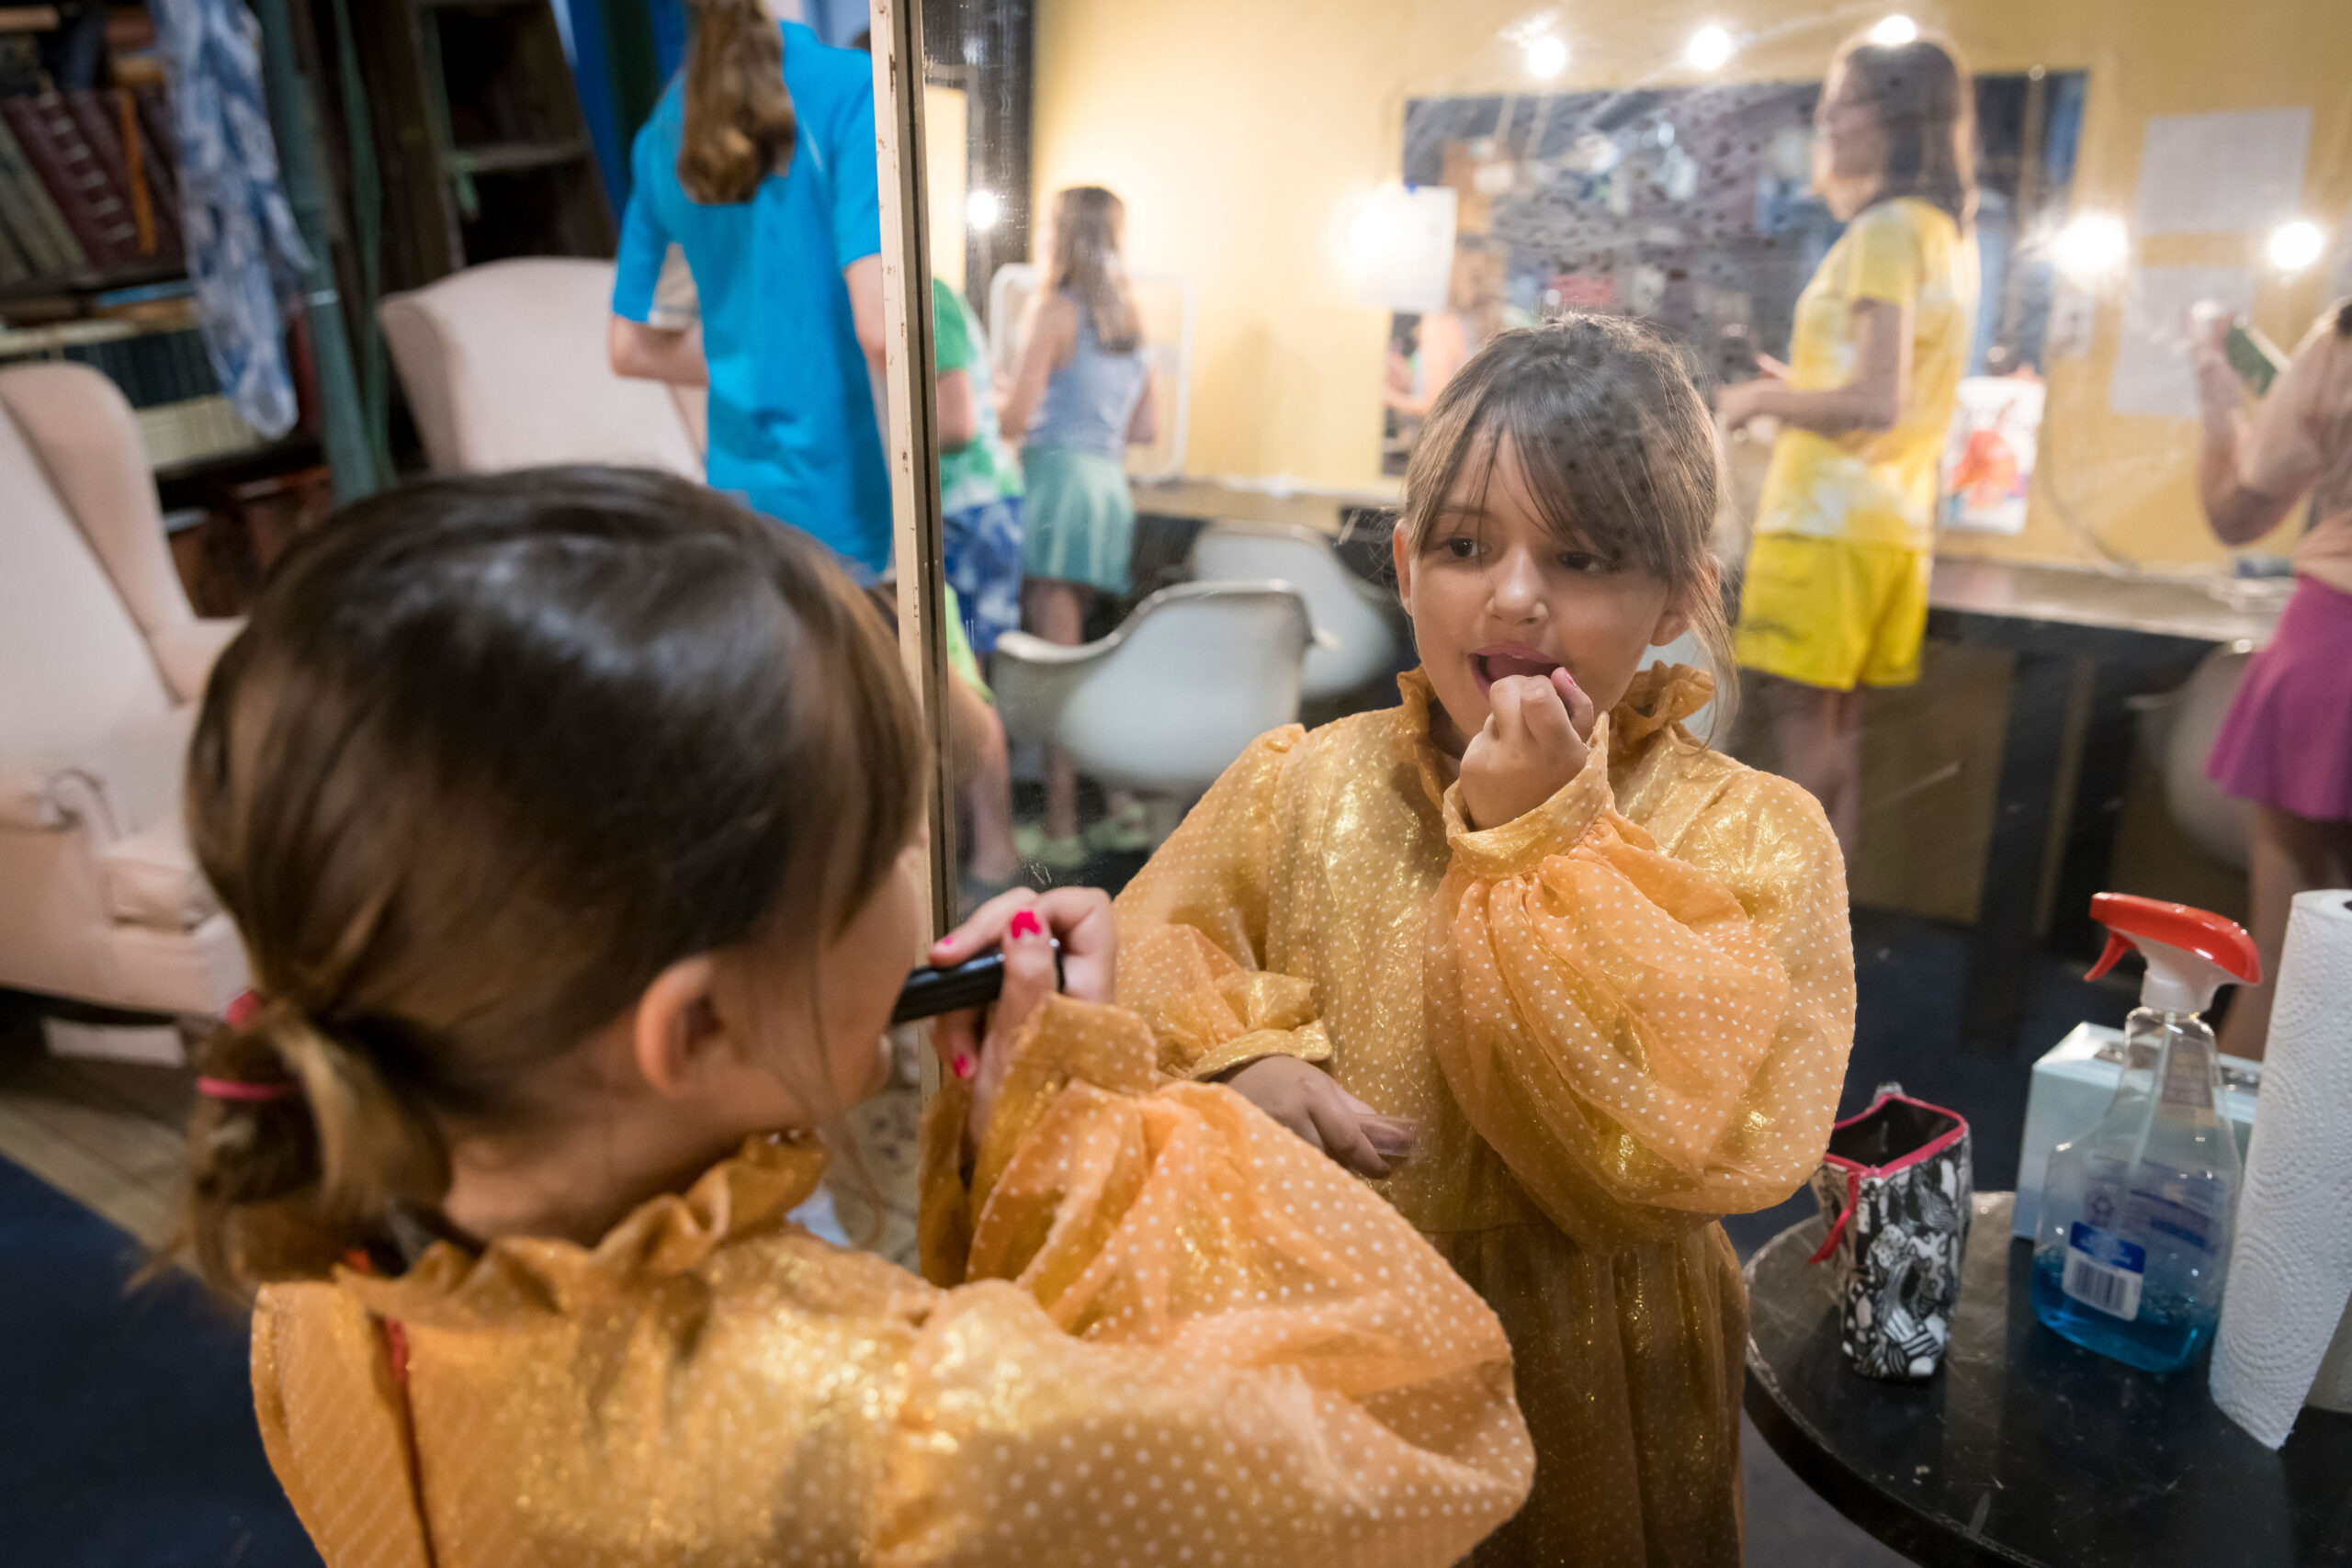 A child performing in Cape Cod Theatre Company's production of "Finding Nemo" puts on makeup backstage before a show.